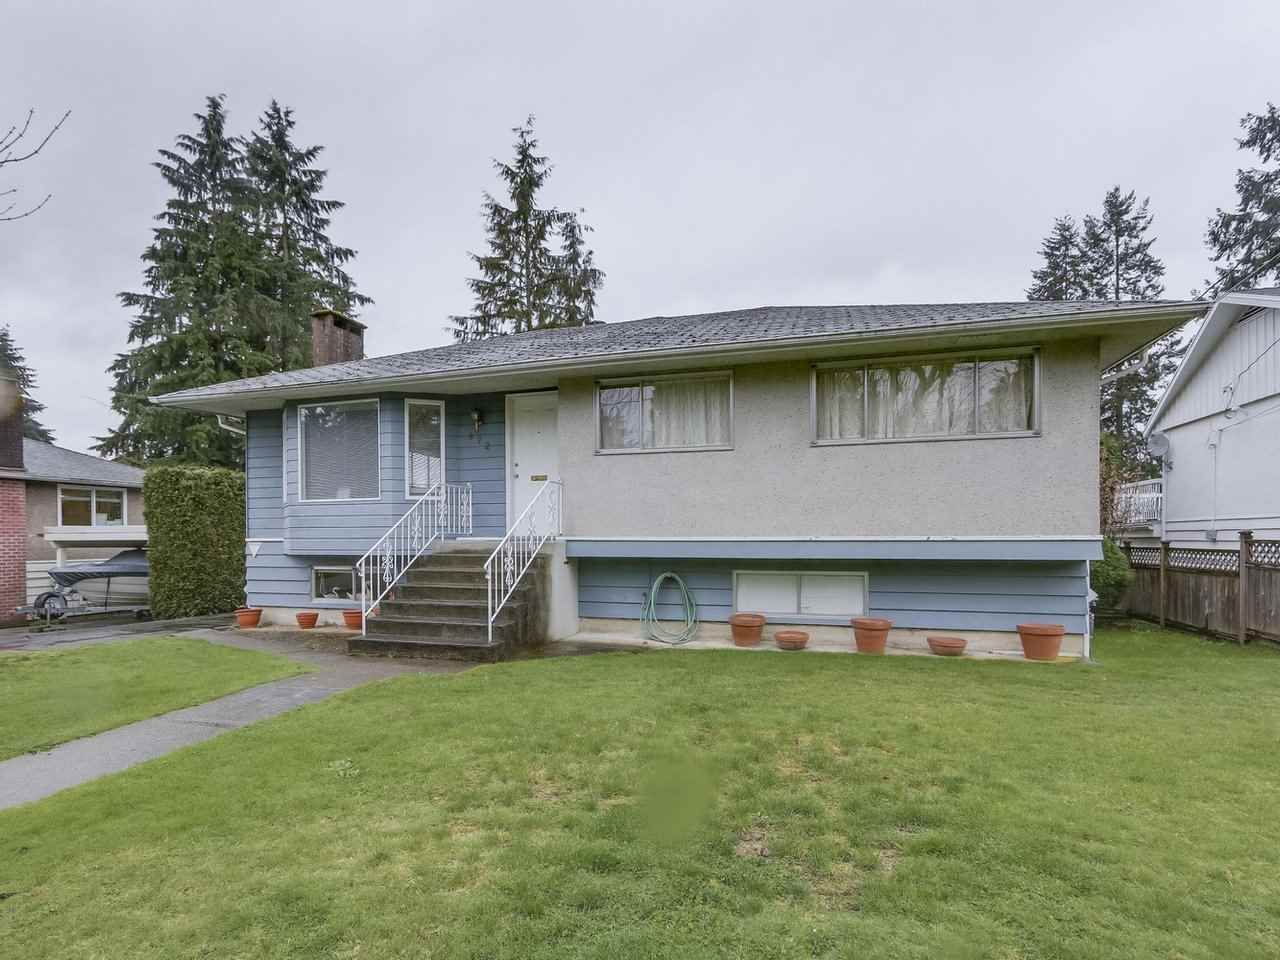 Photo 2: Photos: 672 FLORENCE Street in Coquitlam: Coquitlam West House for sale : MLS®# R2255976